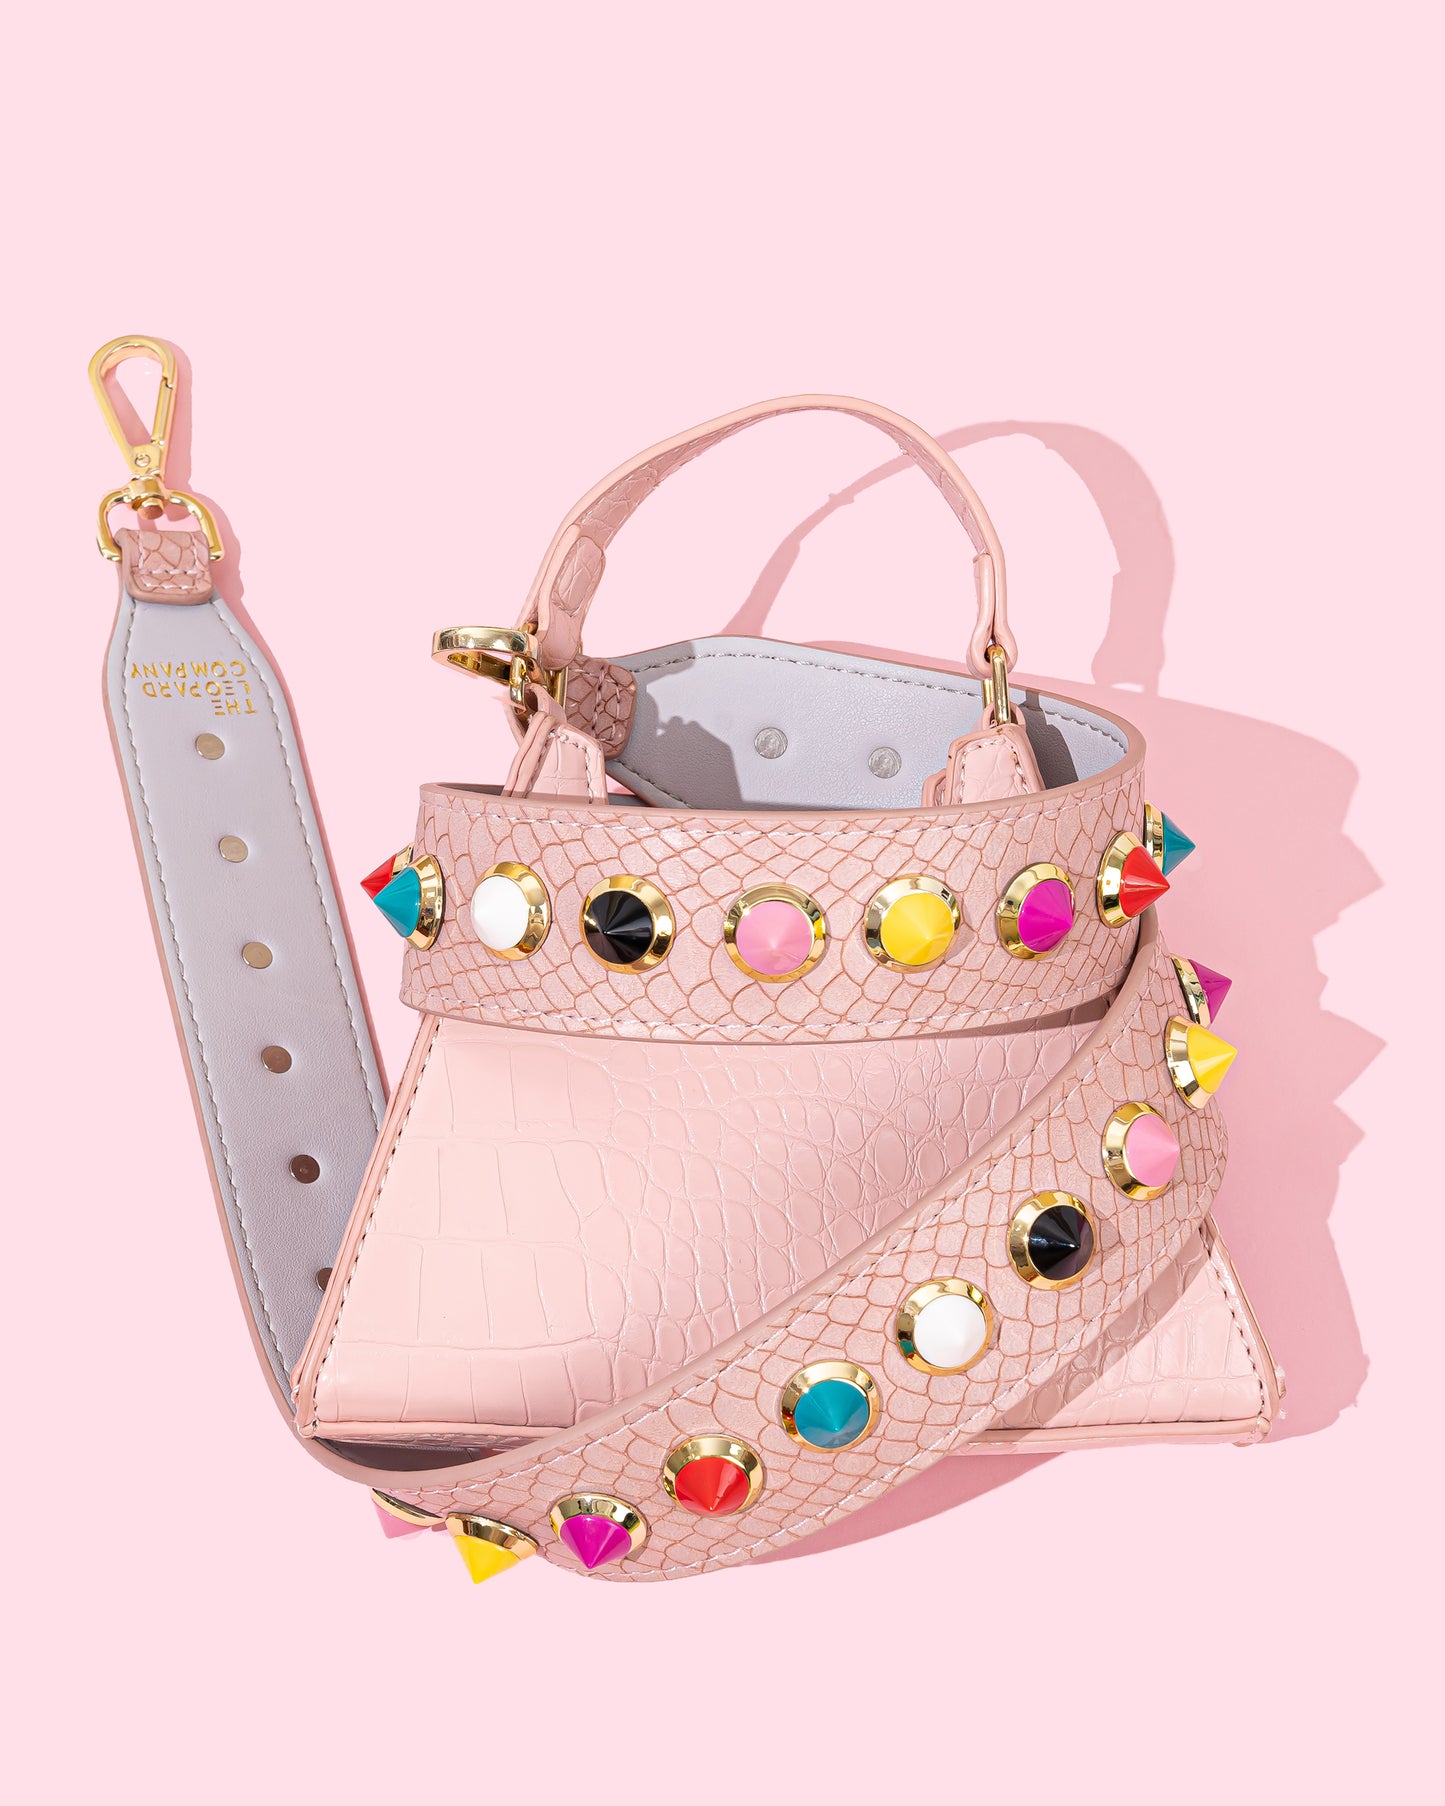 Pink bag strap with multi-coloured studs on pink bag.